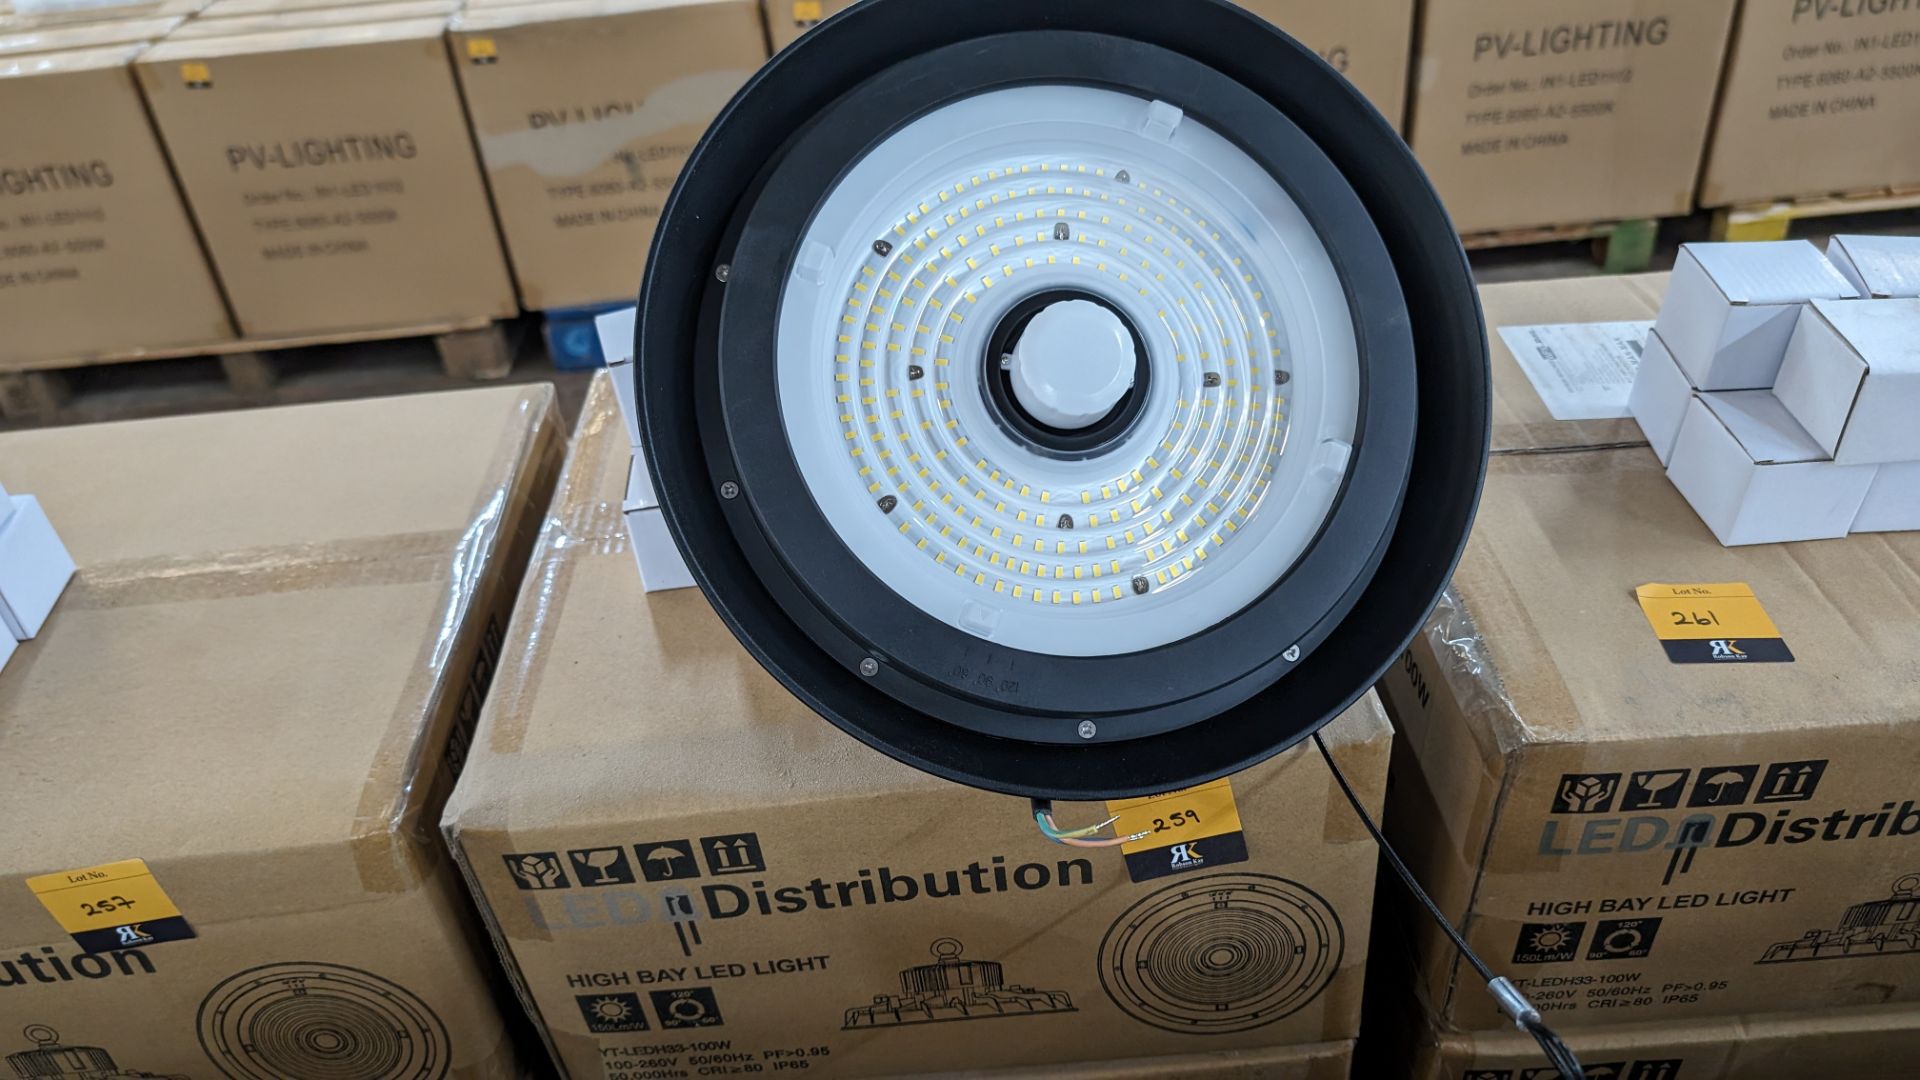 5 off high bay LED lights, model name Typhoon (Nautilus Shell Inspired Heat Sink Design) switchable